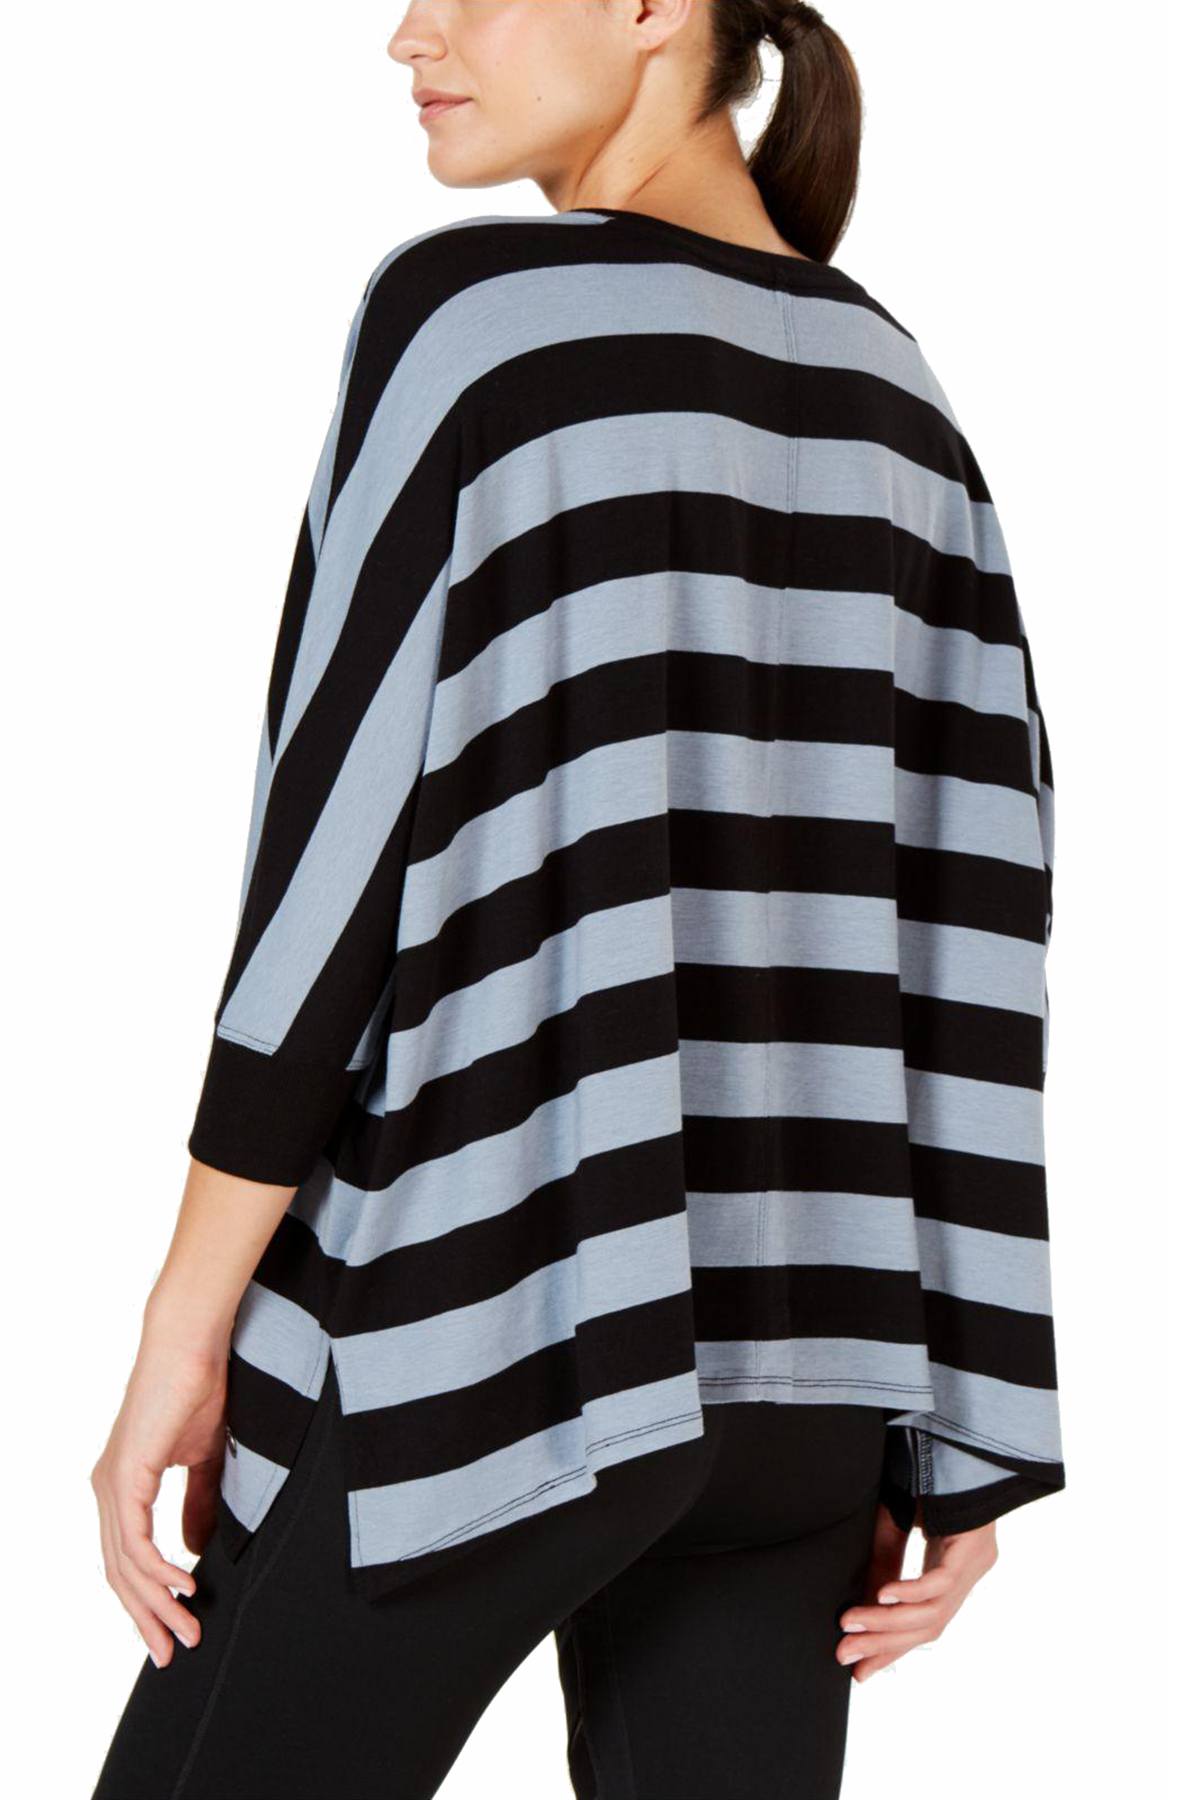 Calvin Klein Performance Halogen-Blue/Black Performance Rugby-Striped Relaxed Dolman-Sleeve Top